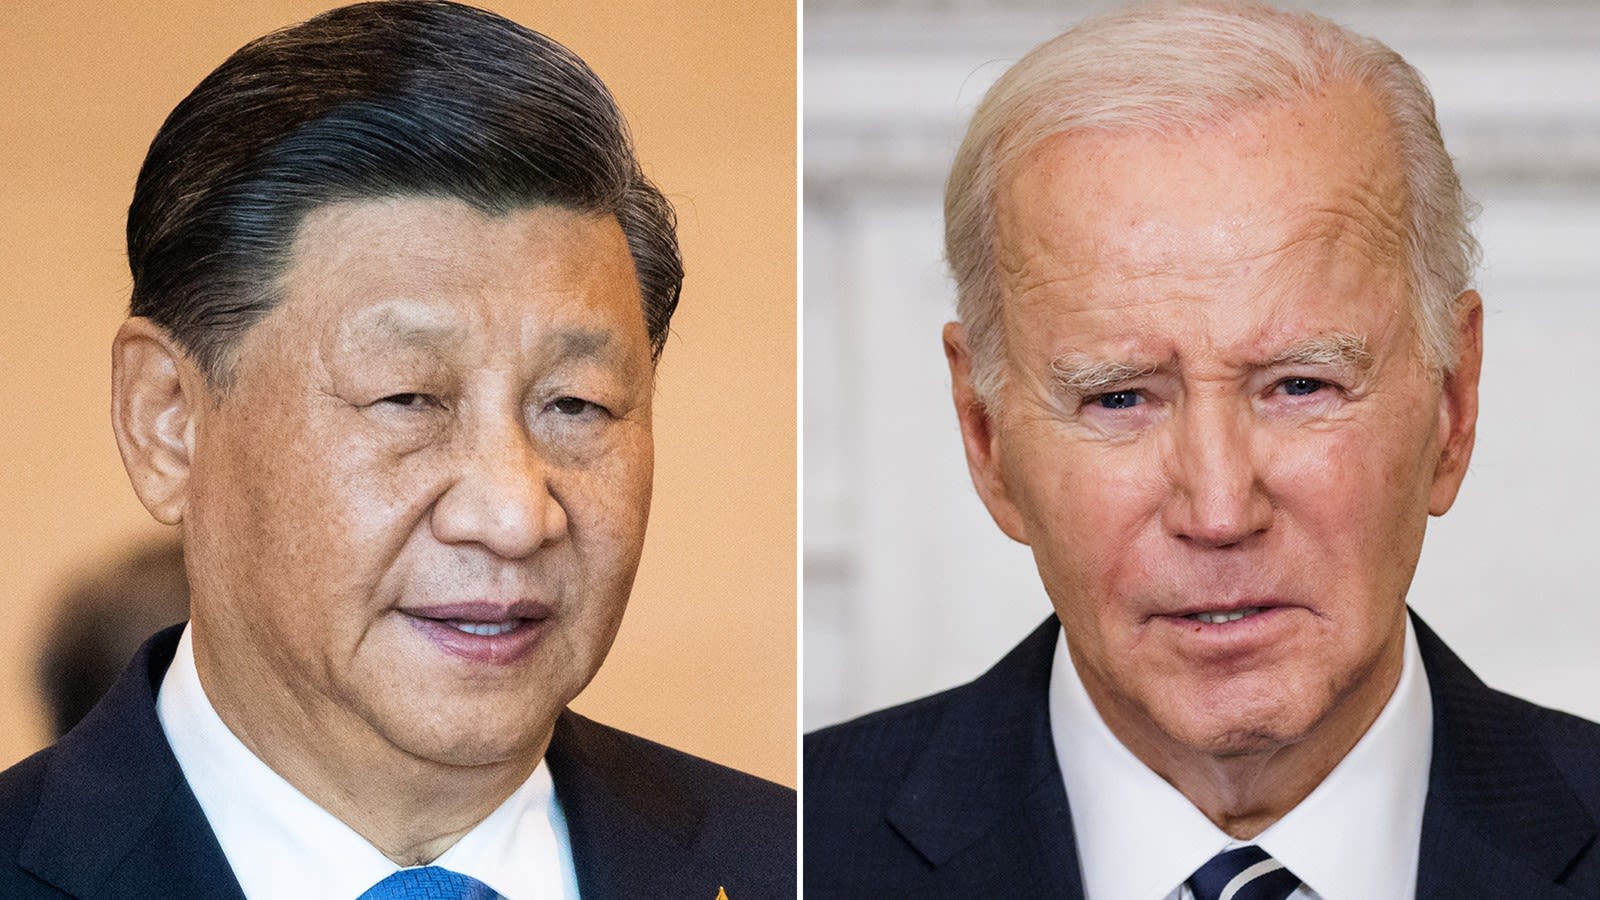 US President Joe Biden and Chinese President Xi Jinping wrapped up their high-stakes meeting in fou...